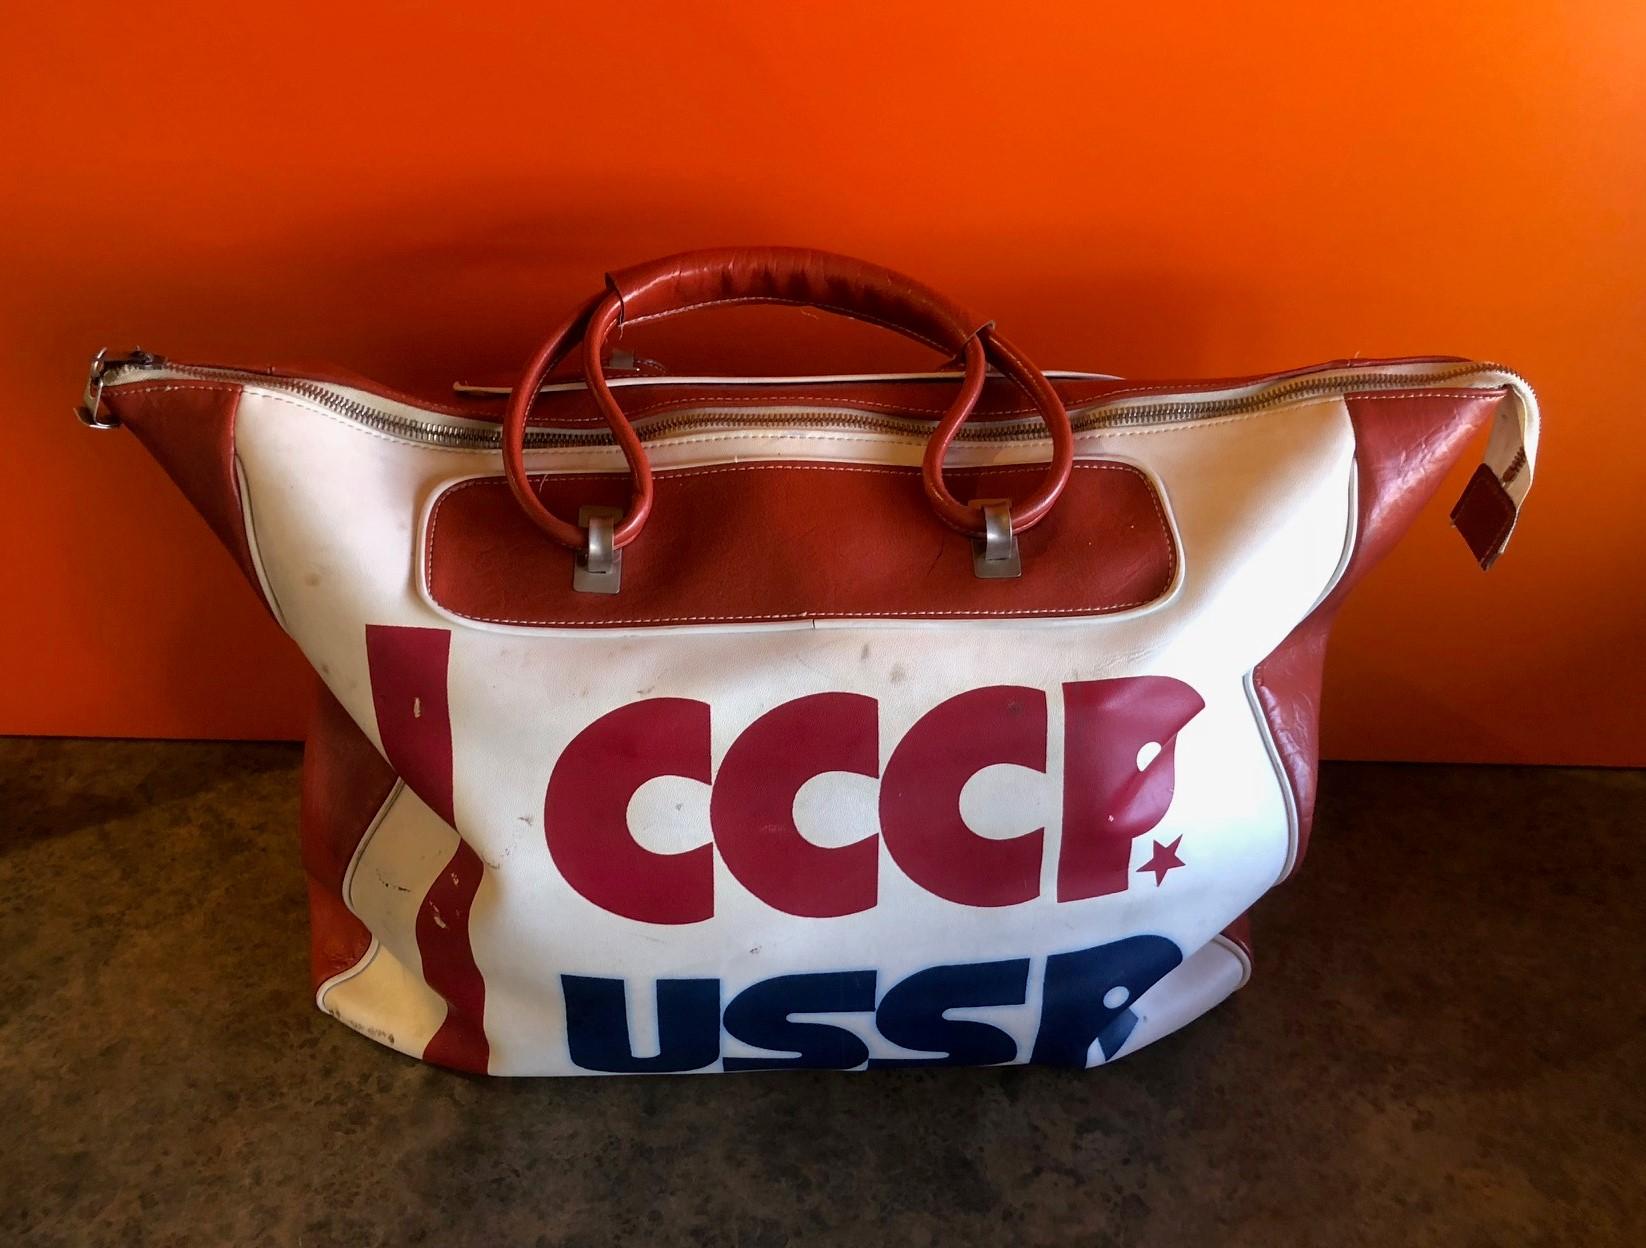 Authentic CCCP USSR Olympic (believed to be Winter 1984) Naugahyde sports bag, circa 1980s

The bag is large and authentic with the original Russian label intact. The piece is believed to be designed by Adidas for the 1984 games in Sarajevo?,